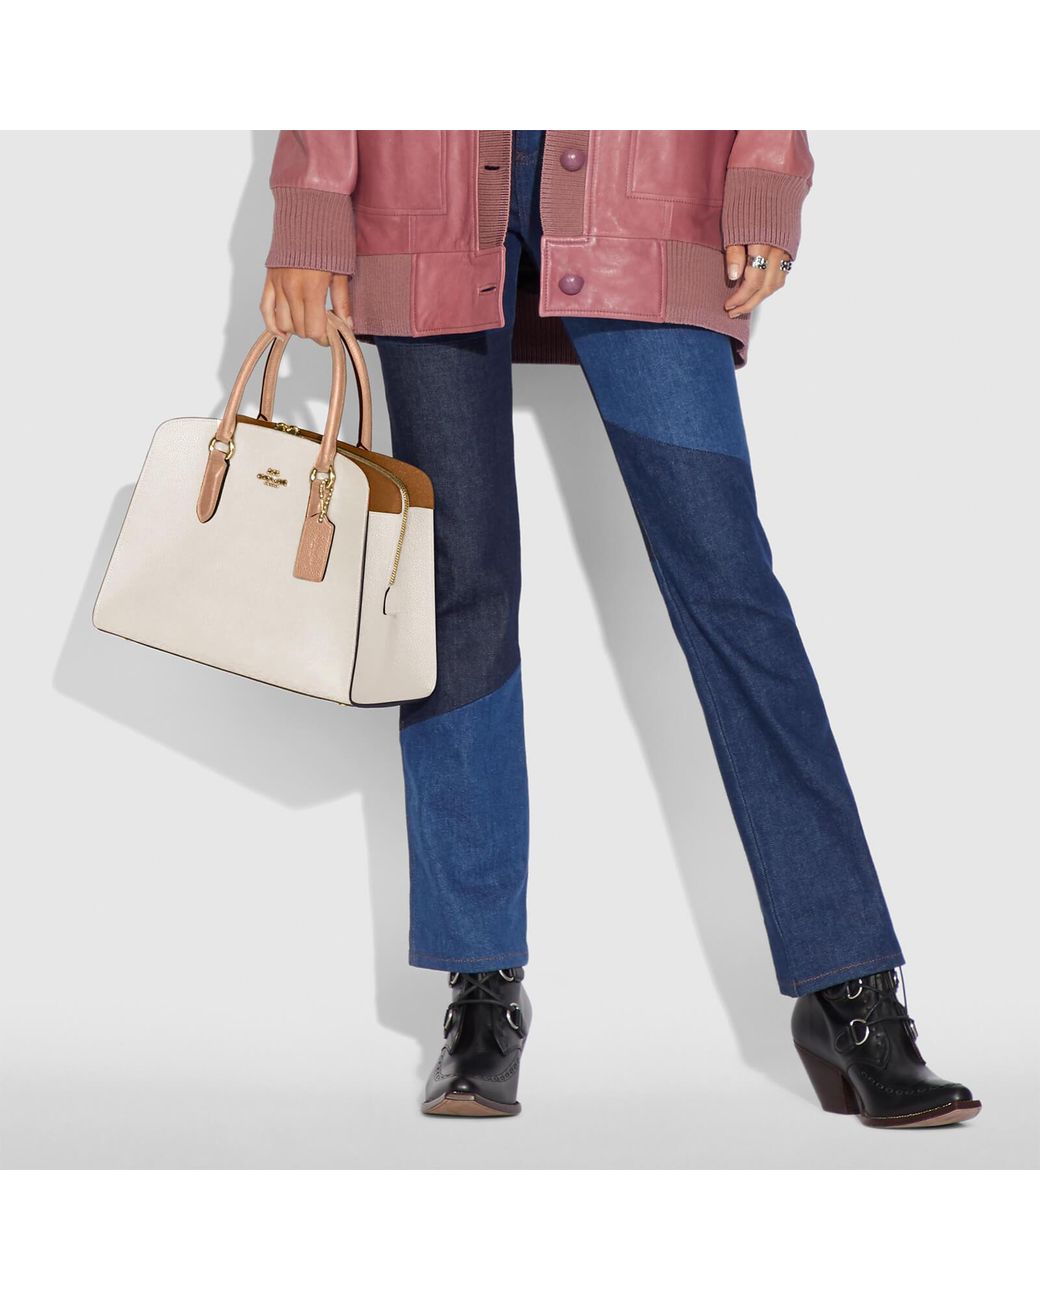 COACH Colorblock Channing Carryall | Lyst UK